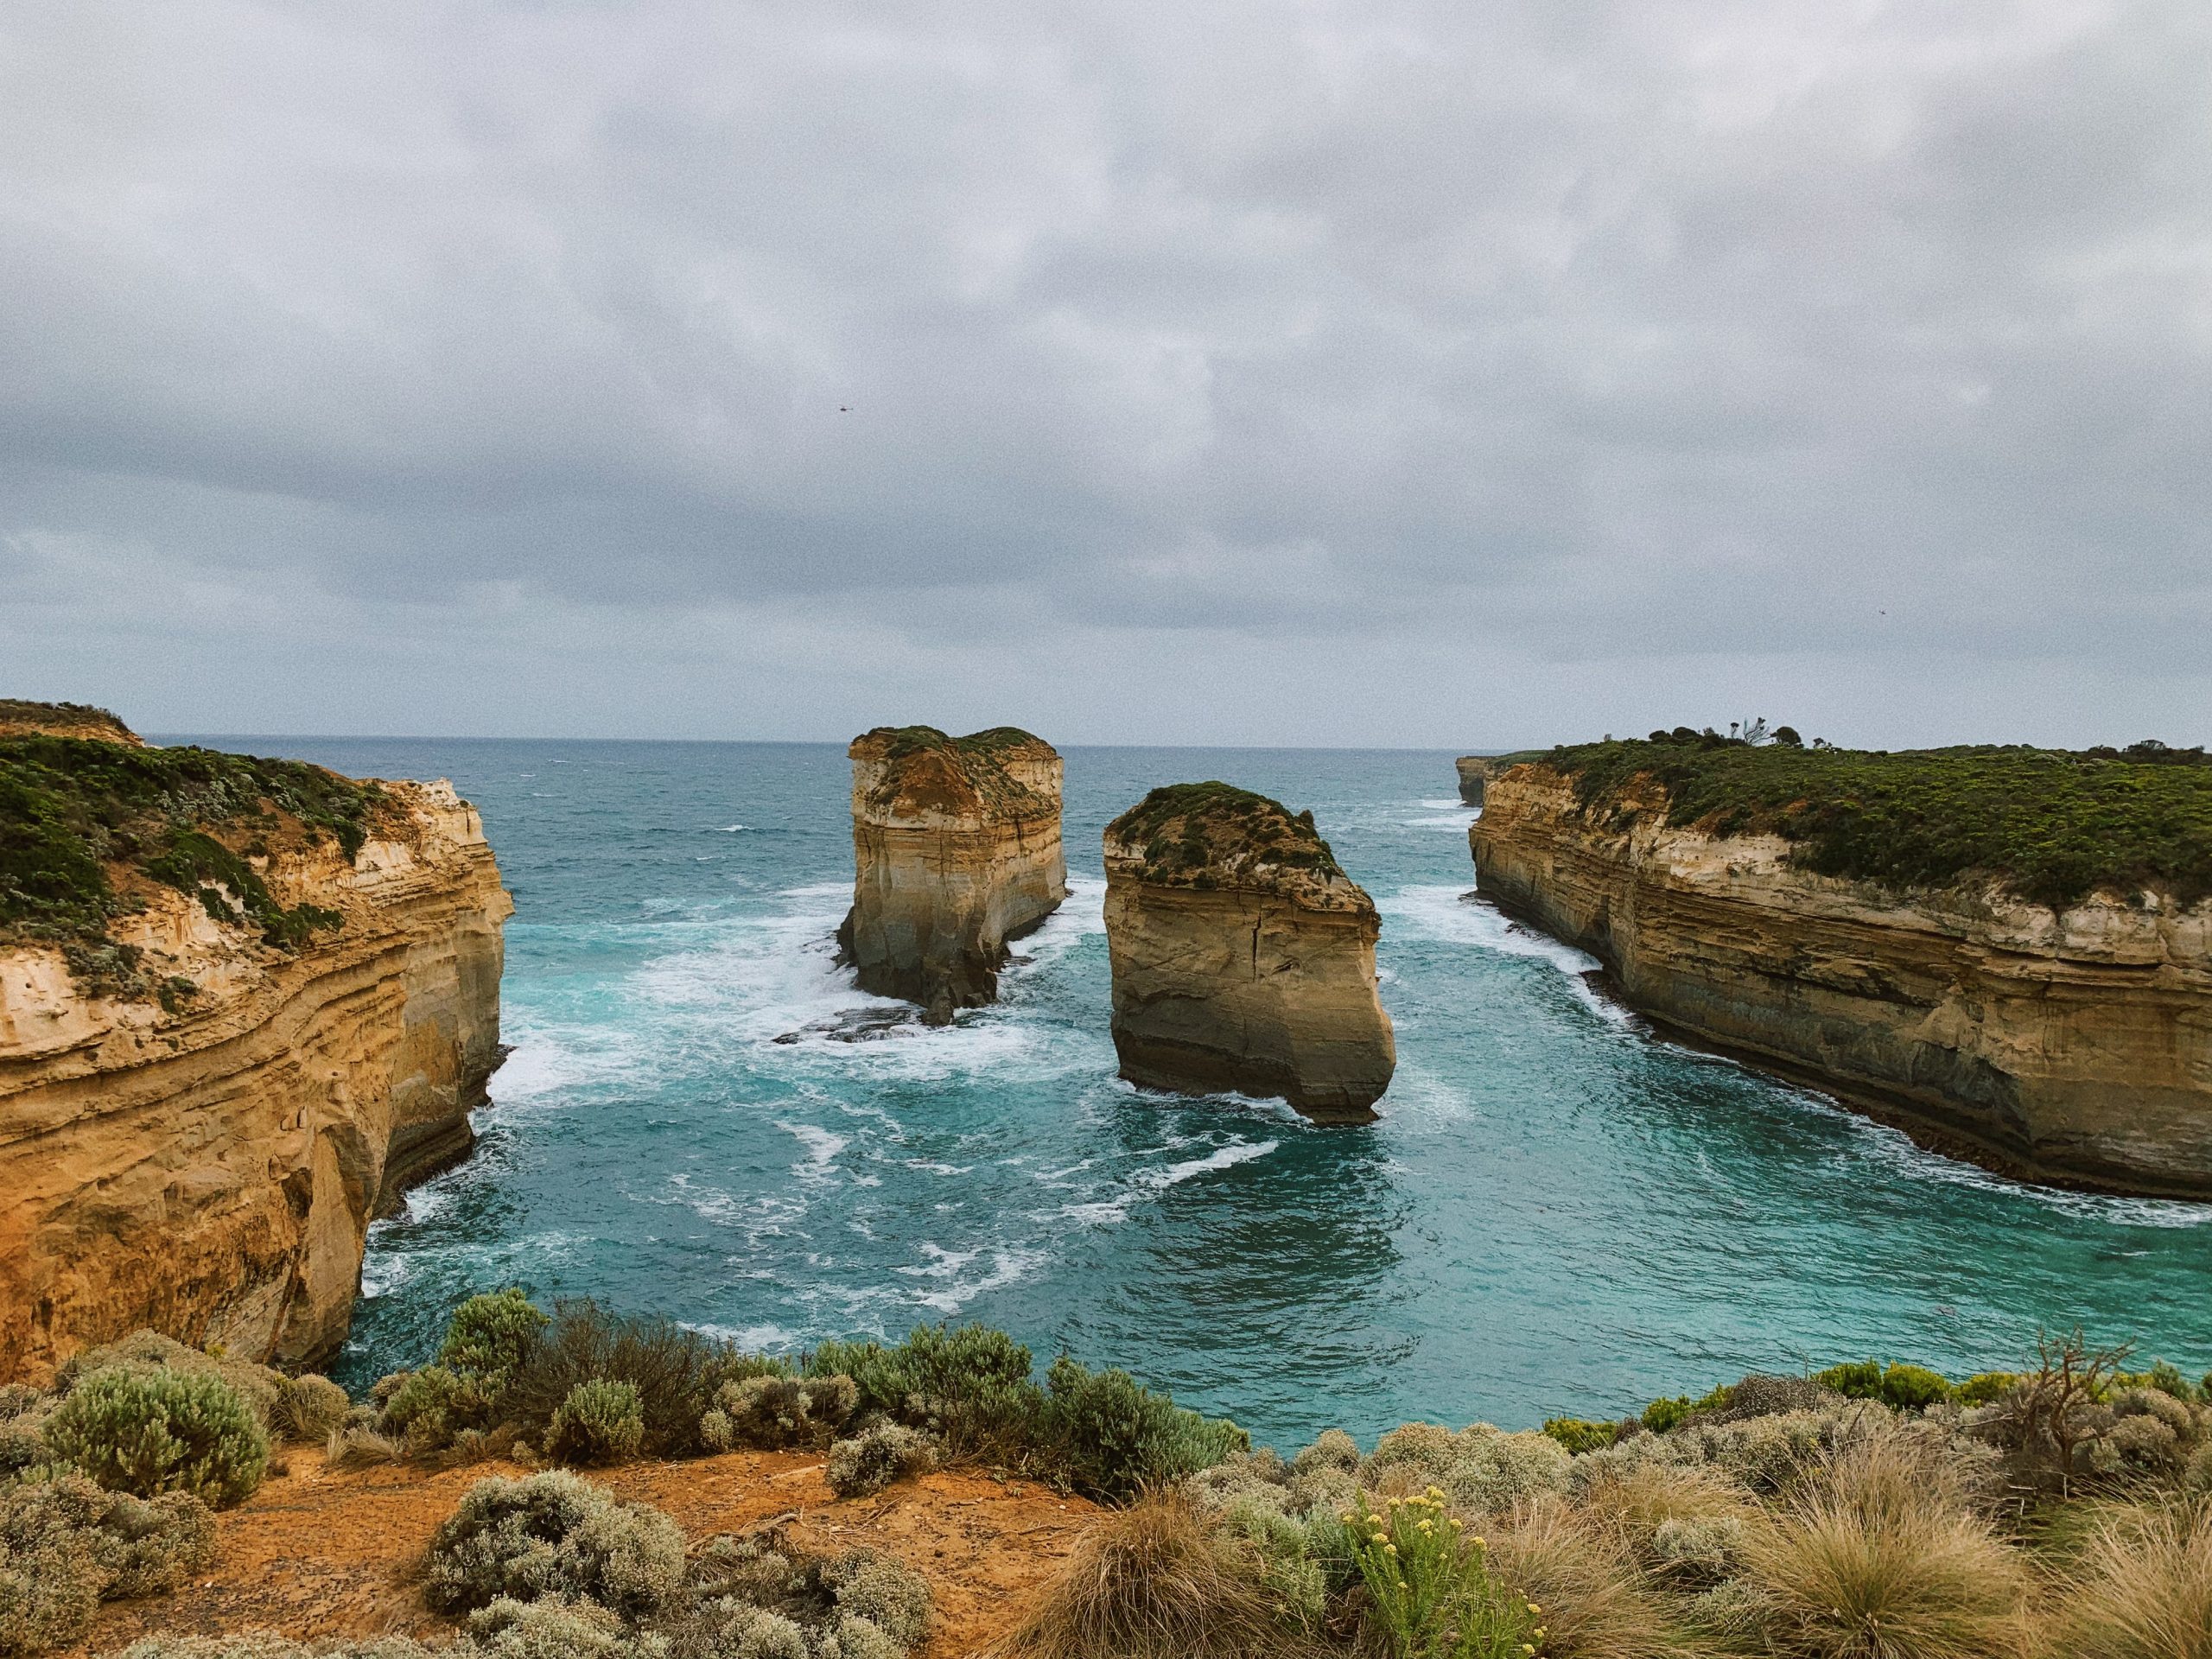 Can't Miss On The Great Ocean Road